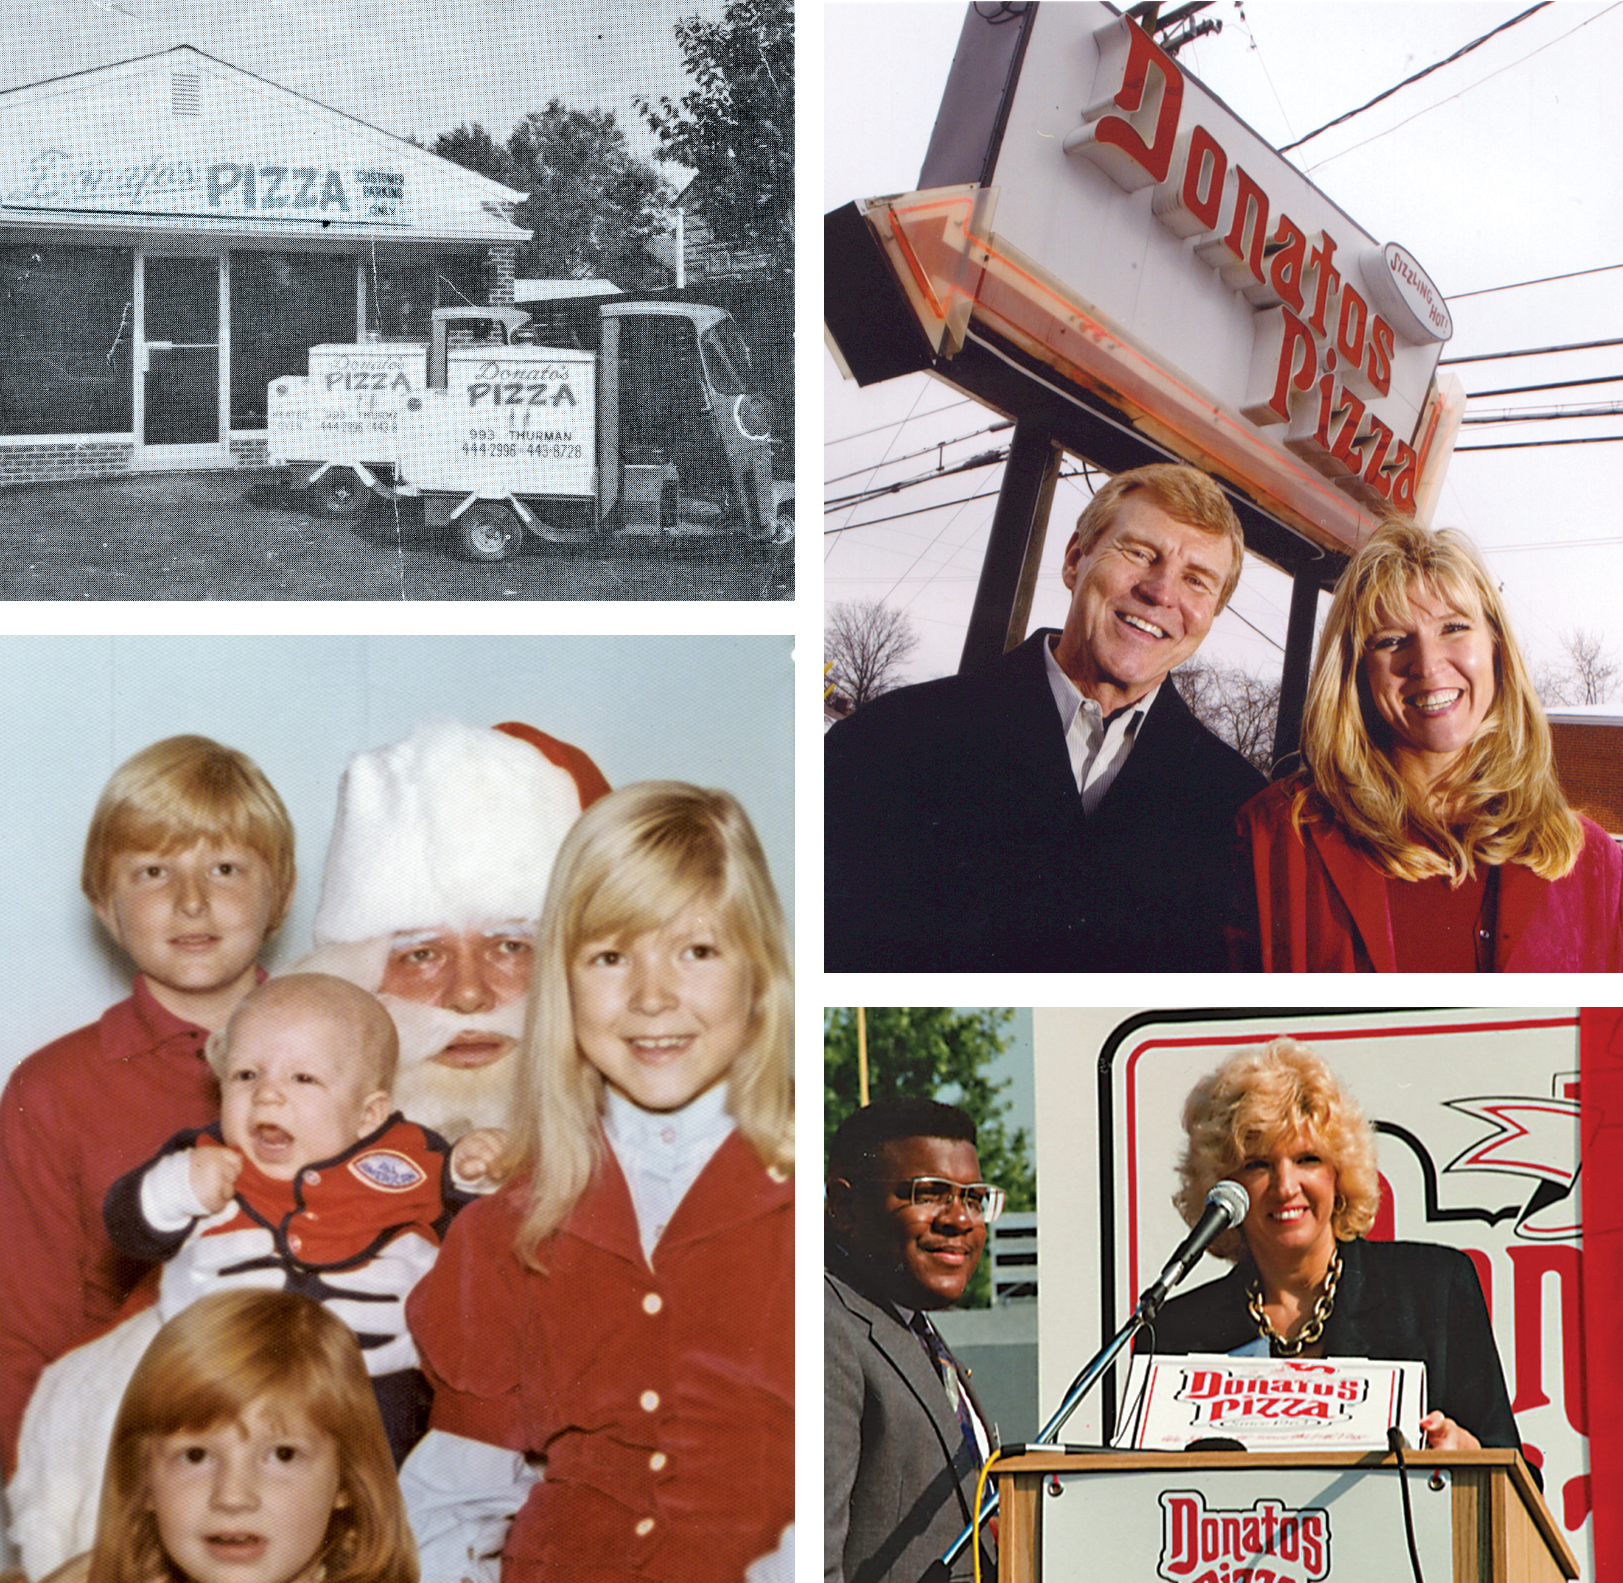 A montage of old images of Jane Grote Abell and her family: The first is a black-and-white image of a one-story restaurant with pizza sign. The second: Despite what looks like a cold winter day, a father and his adult daughter stand in front of a Donatos sign. They have the same color hair and wear dress coats and big smiles.  The third photo: A woman with blond curled hair holds a pizza box and stands between a Donatos backdrop and a microphone. She’s smiling. The fourth: In an old color photo, four kids surround the face of a man dressed as Santa. Only the older girl is smiling, although the oldest boy doesn’t seem unhappy. The younger girl looks like she isn’t sure what to think, and the baby boy is crying or yelling. 